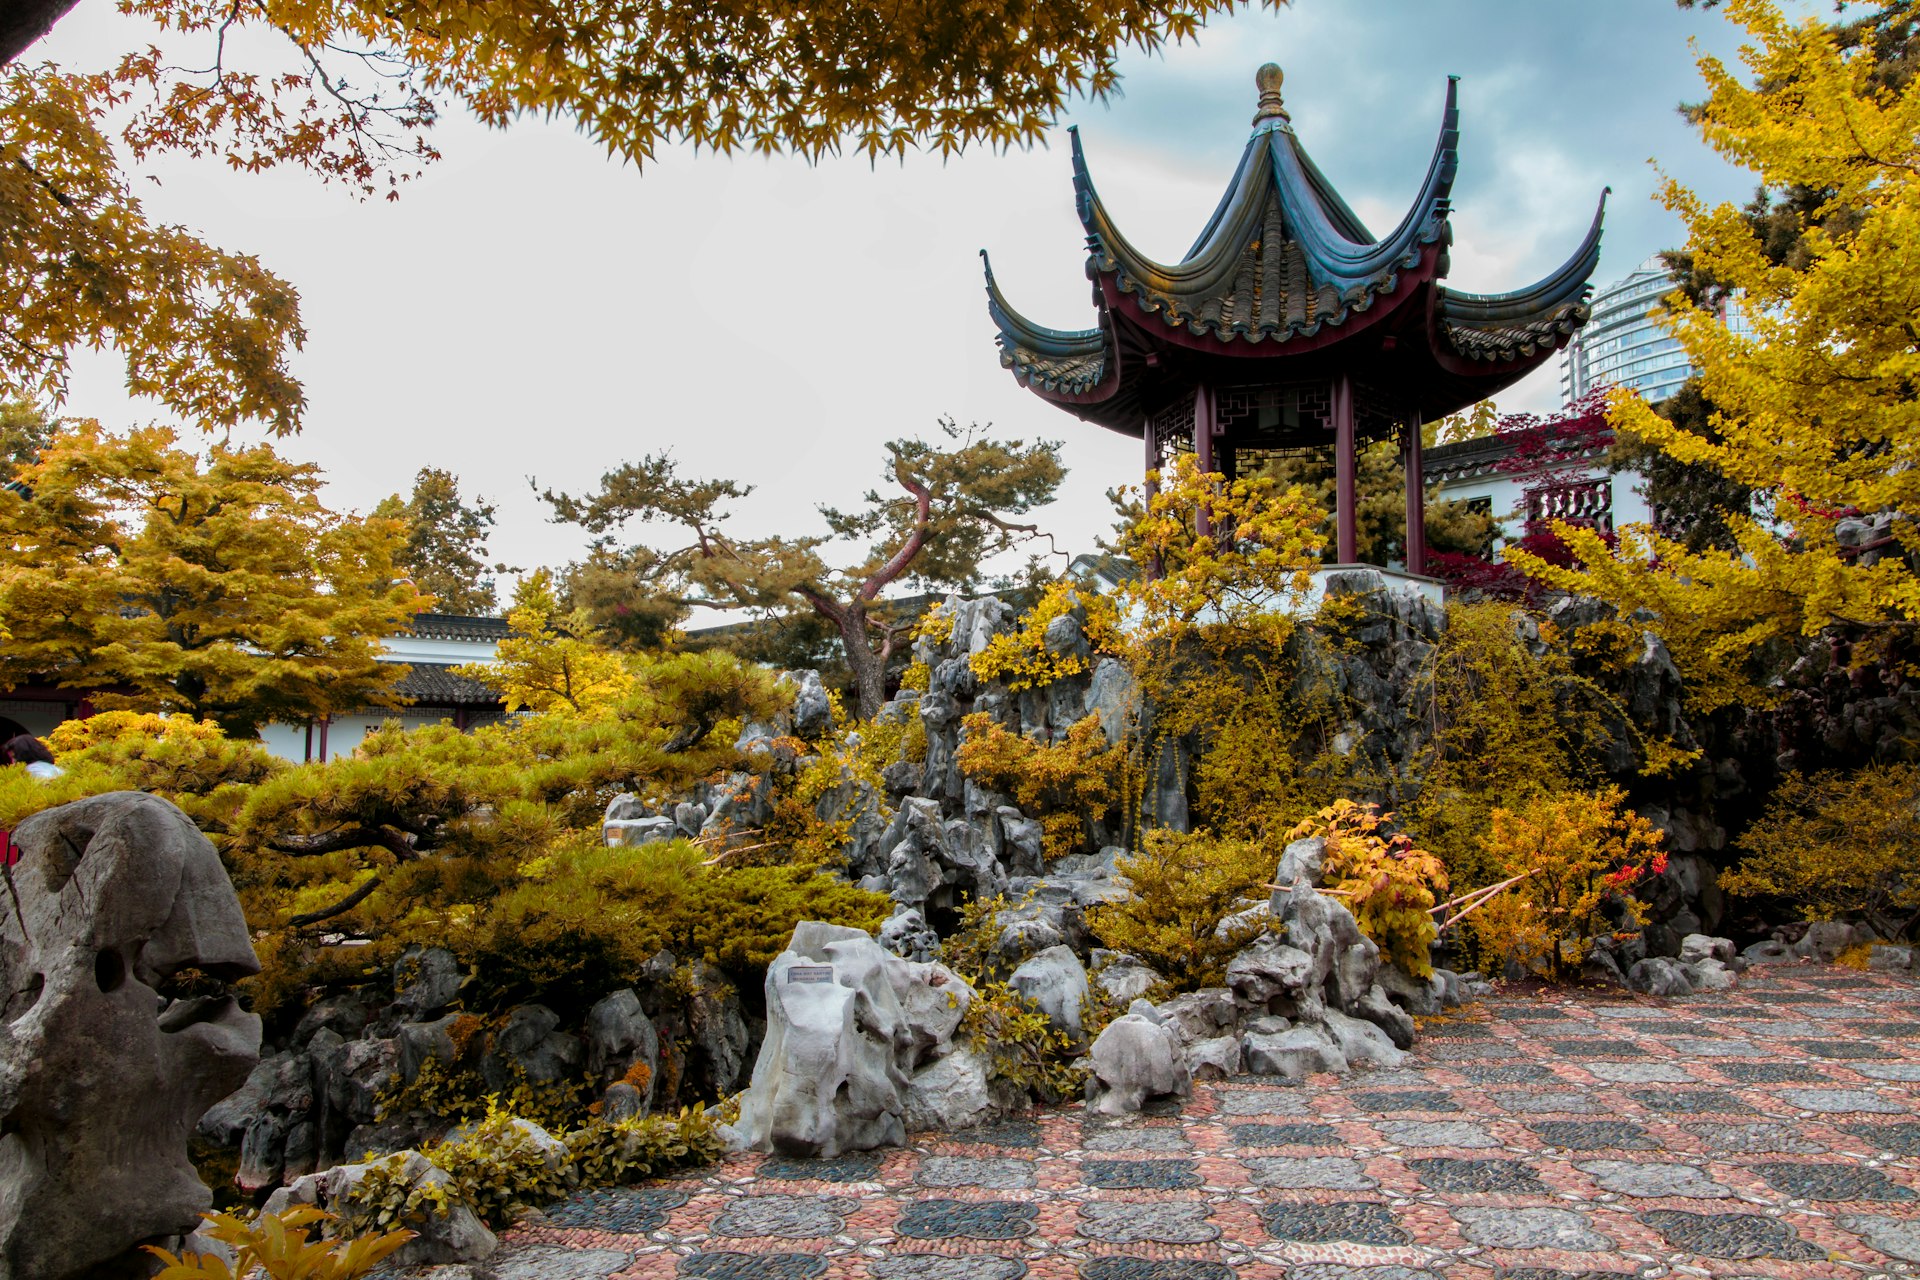 A Chinese-style pagoda in a peaceful garden